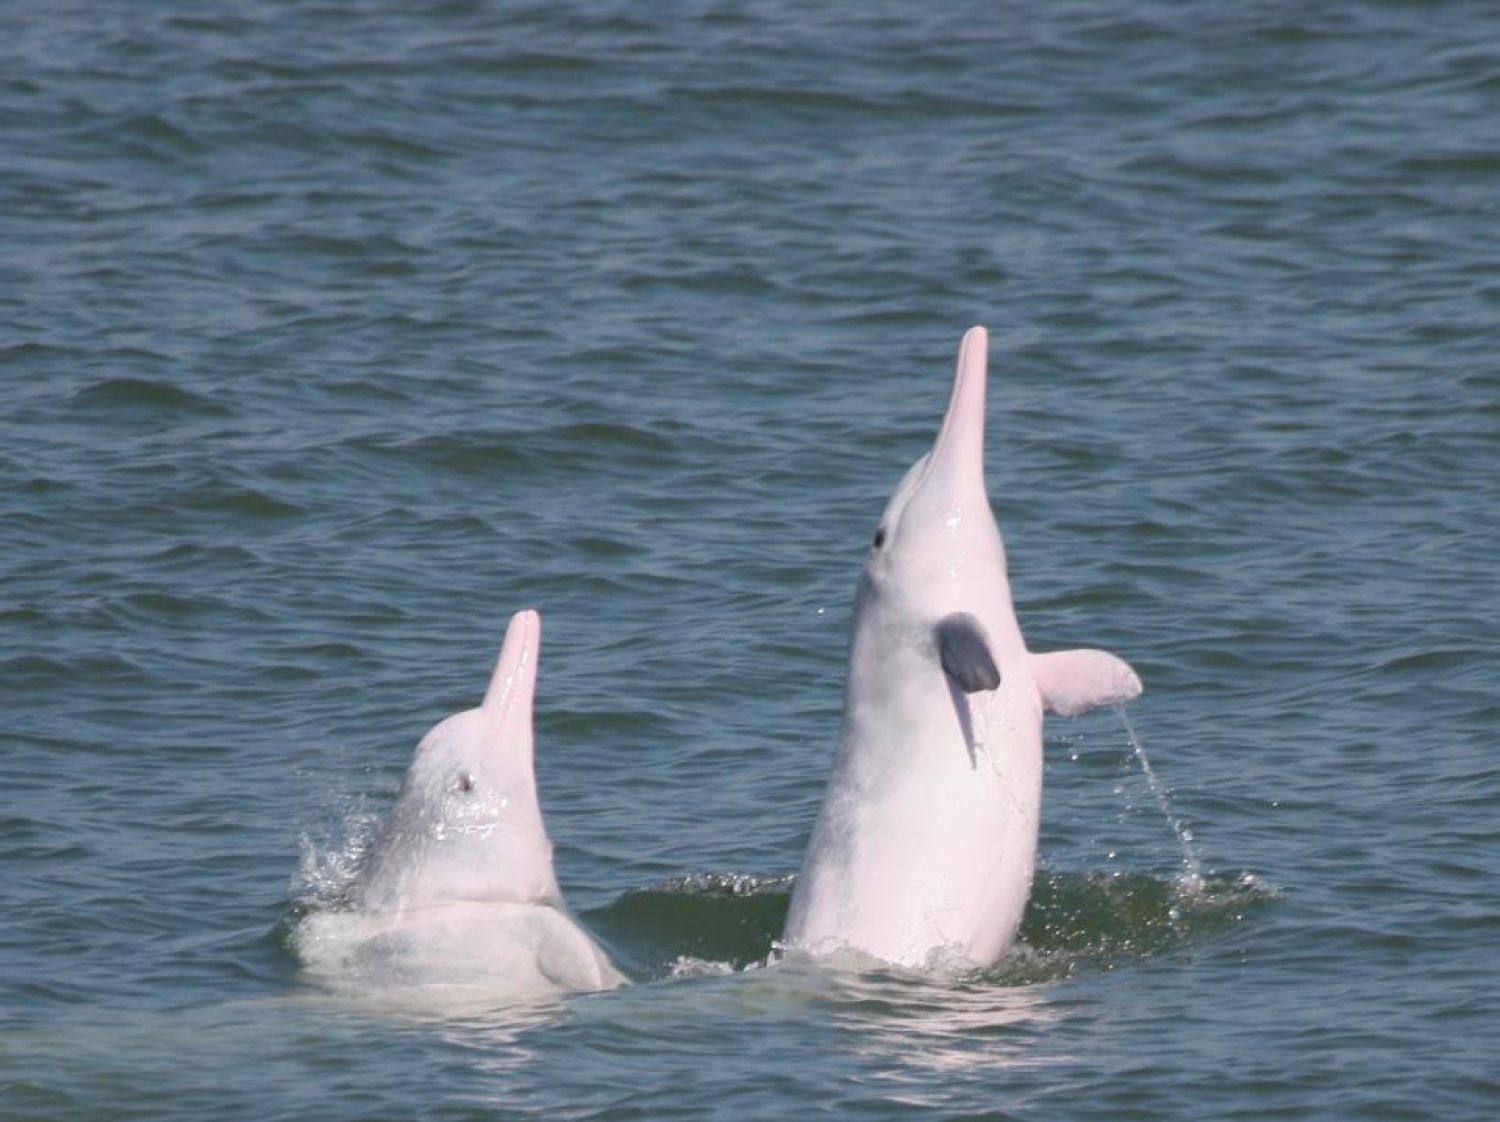 Chinese white dolphins displaying breaching and spy-hopping behaviours in the waters off Hong Kong, where ocean noise pollution threatens their survival. Photo: Hong Kong Dolphin Conservation Society